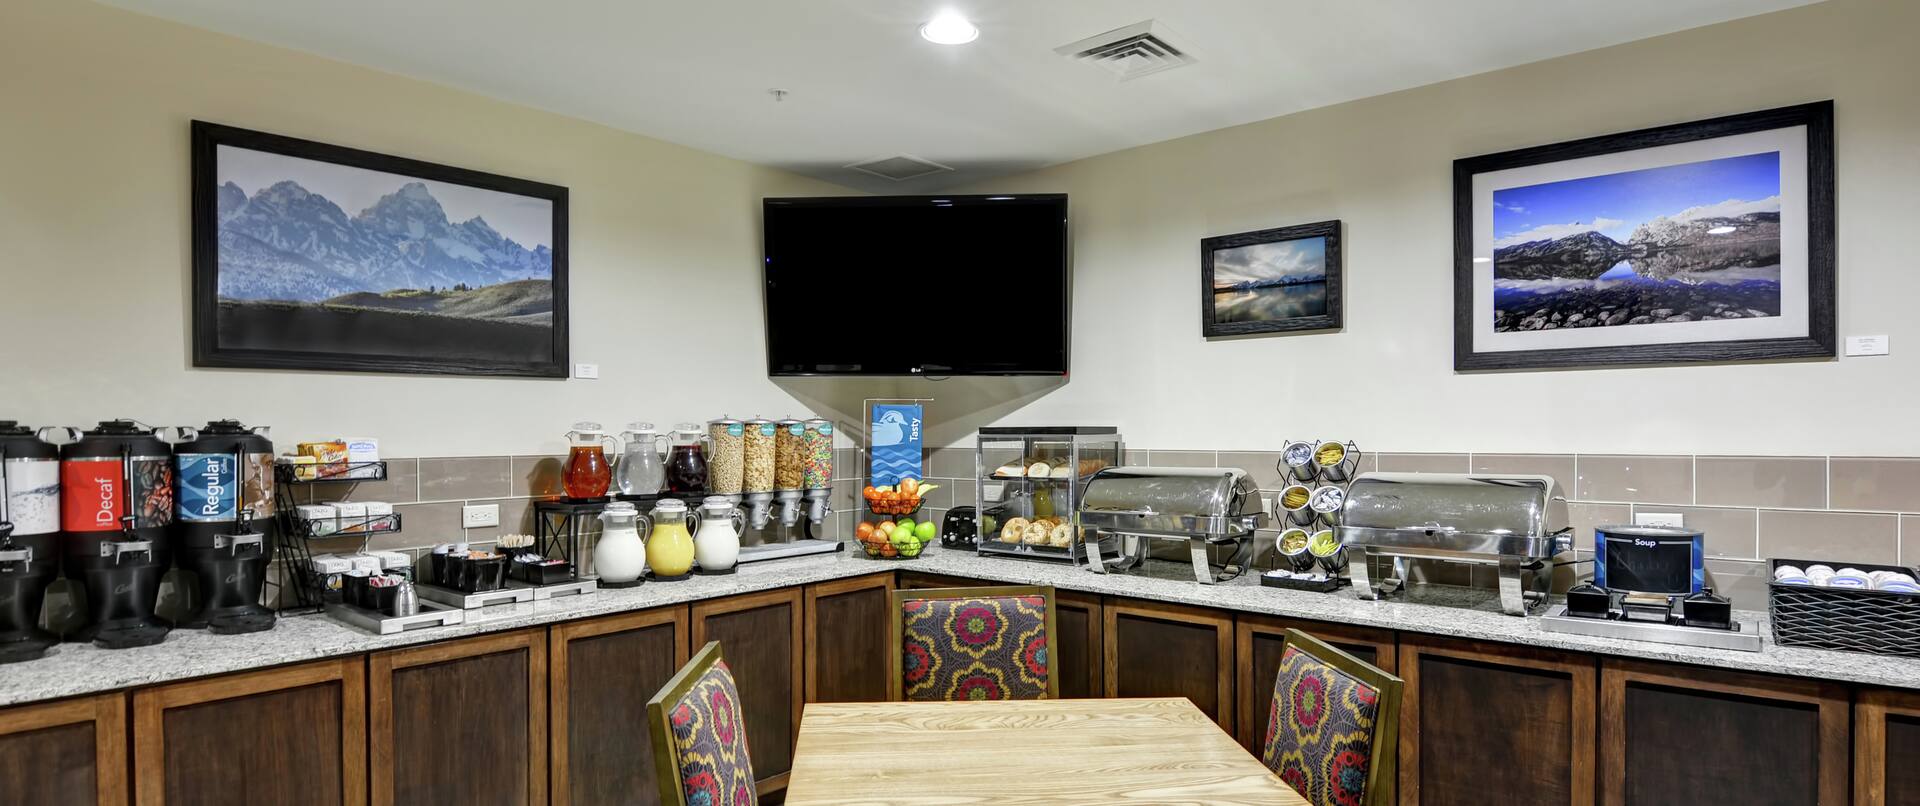 Breakfast Bar and Dining Area